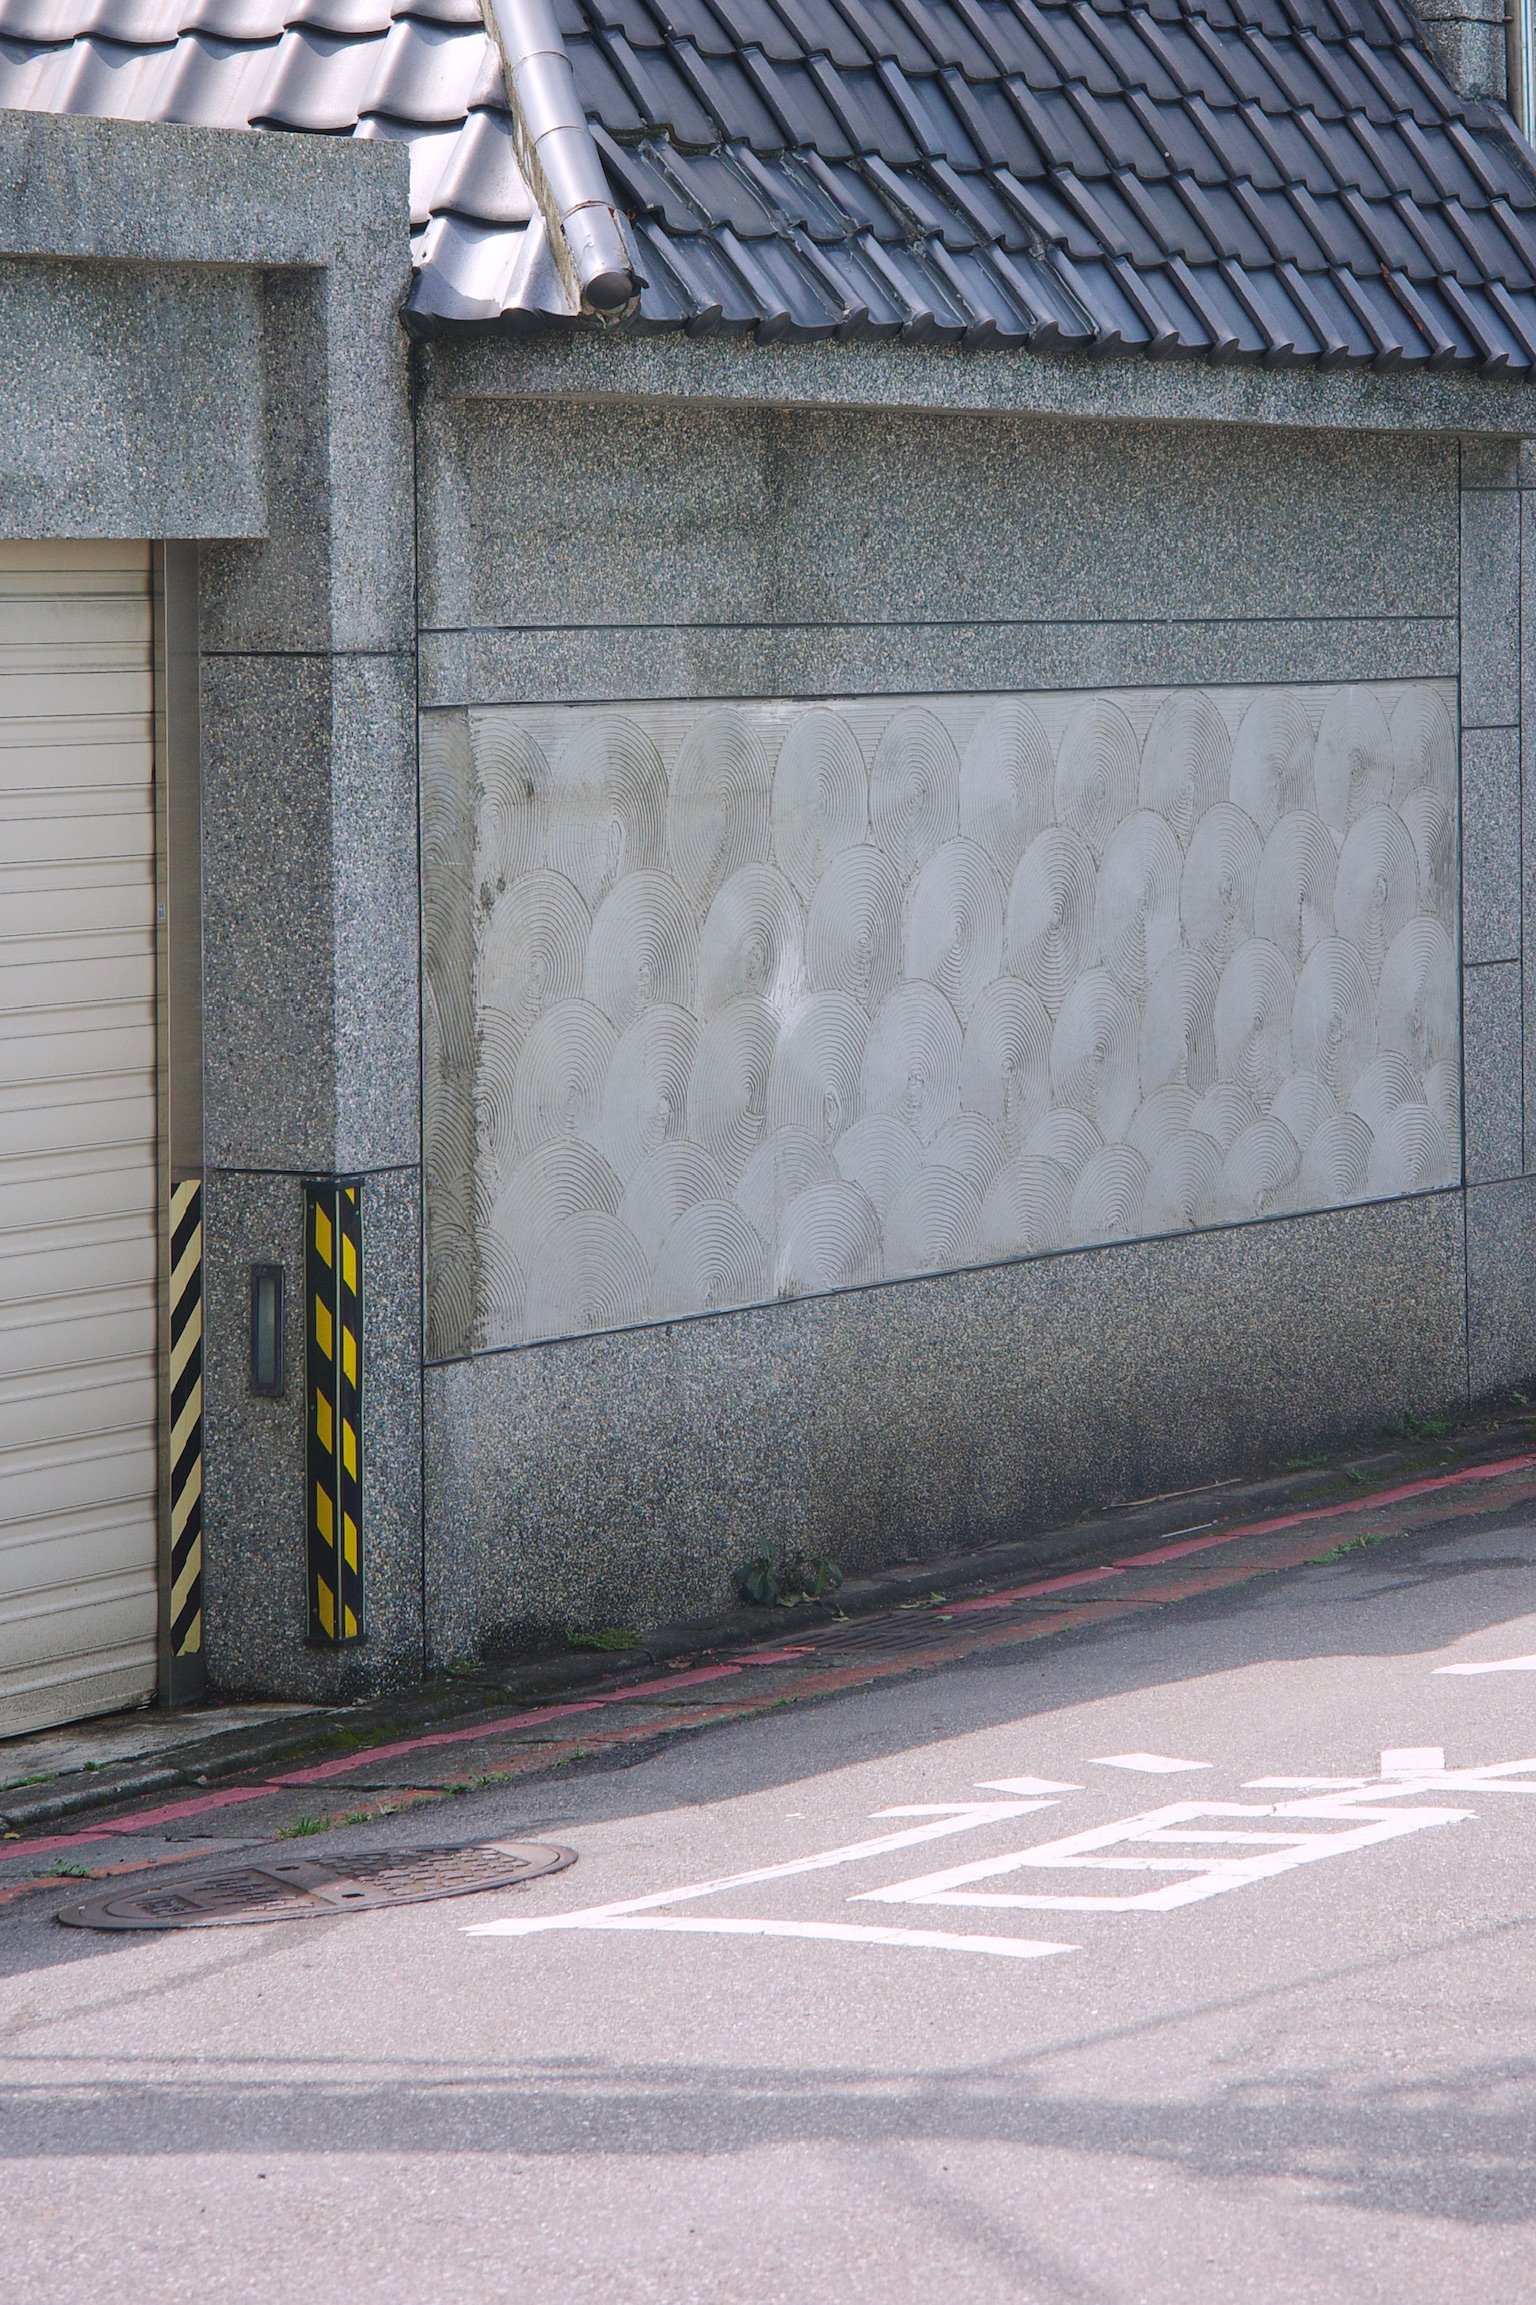 Sunny day, front of a garage door. The wall beside has repeating round brush patterns and dark blue paneling roof.